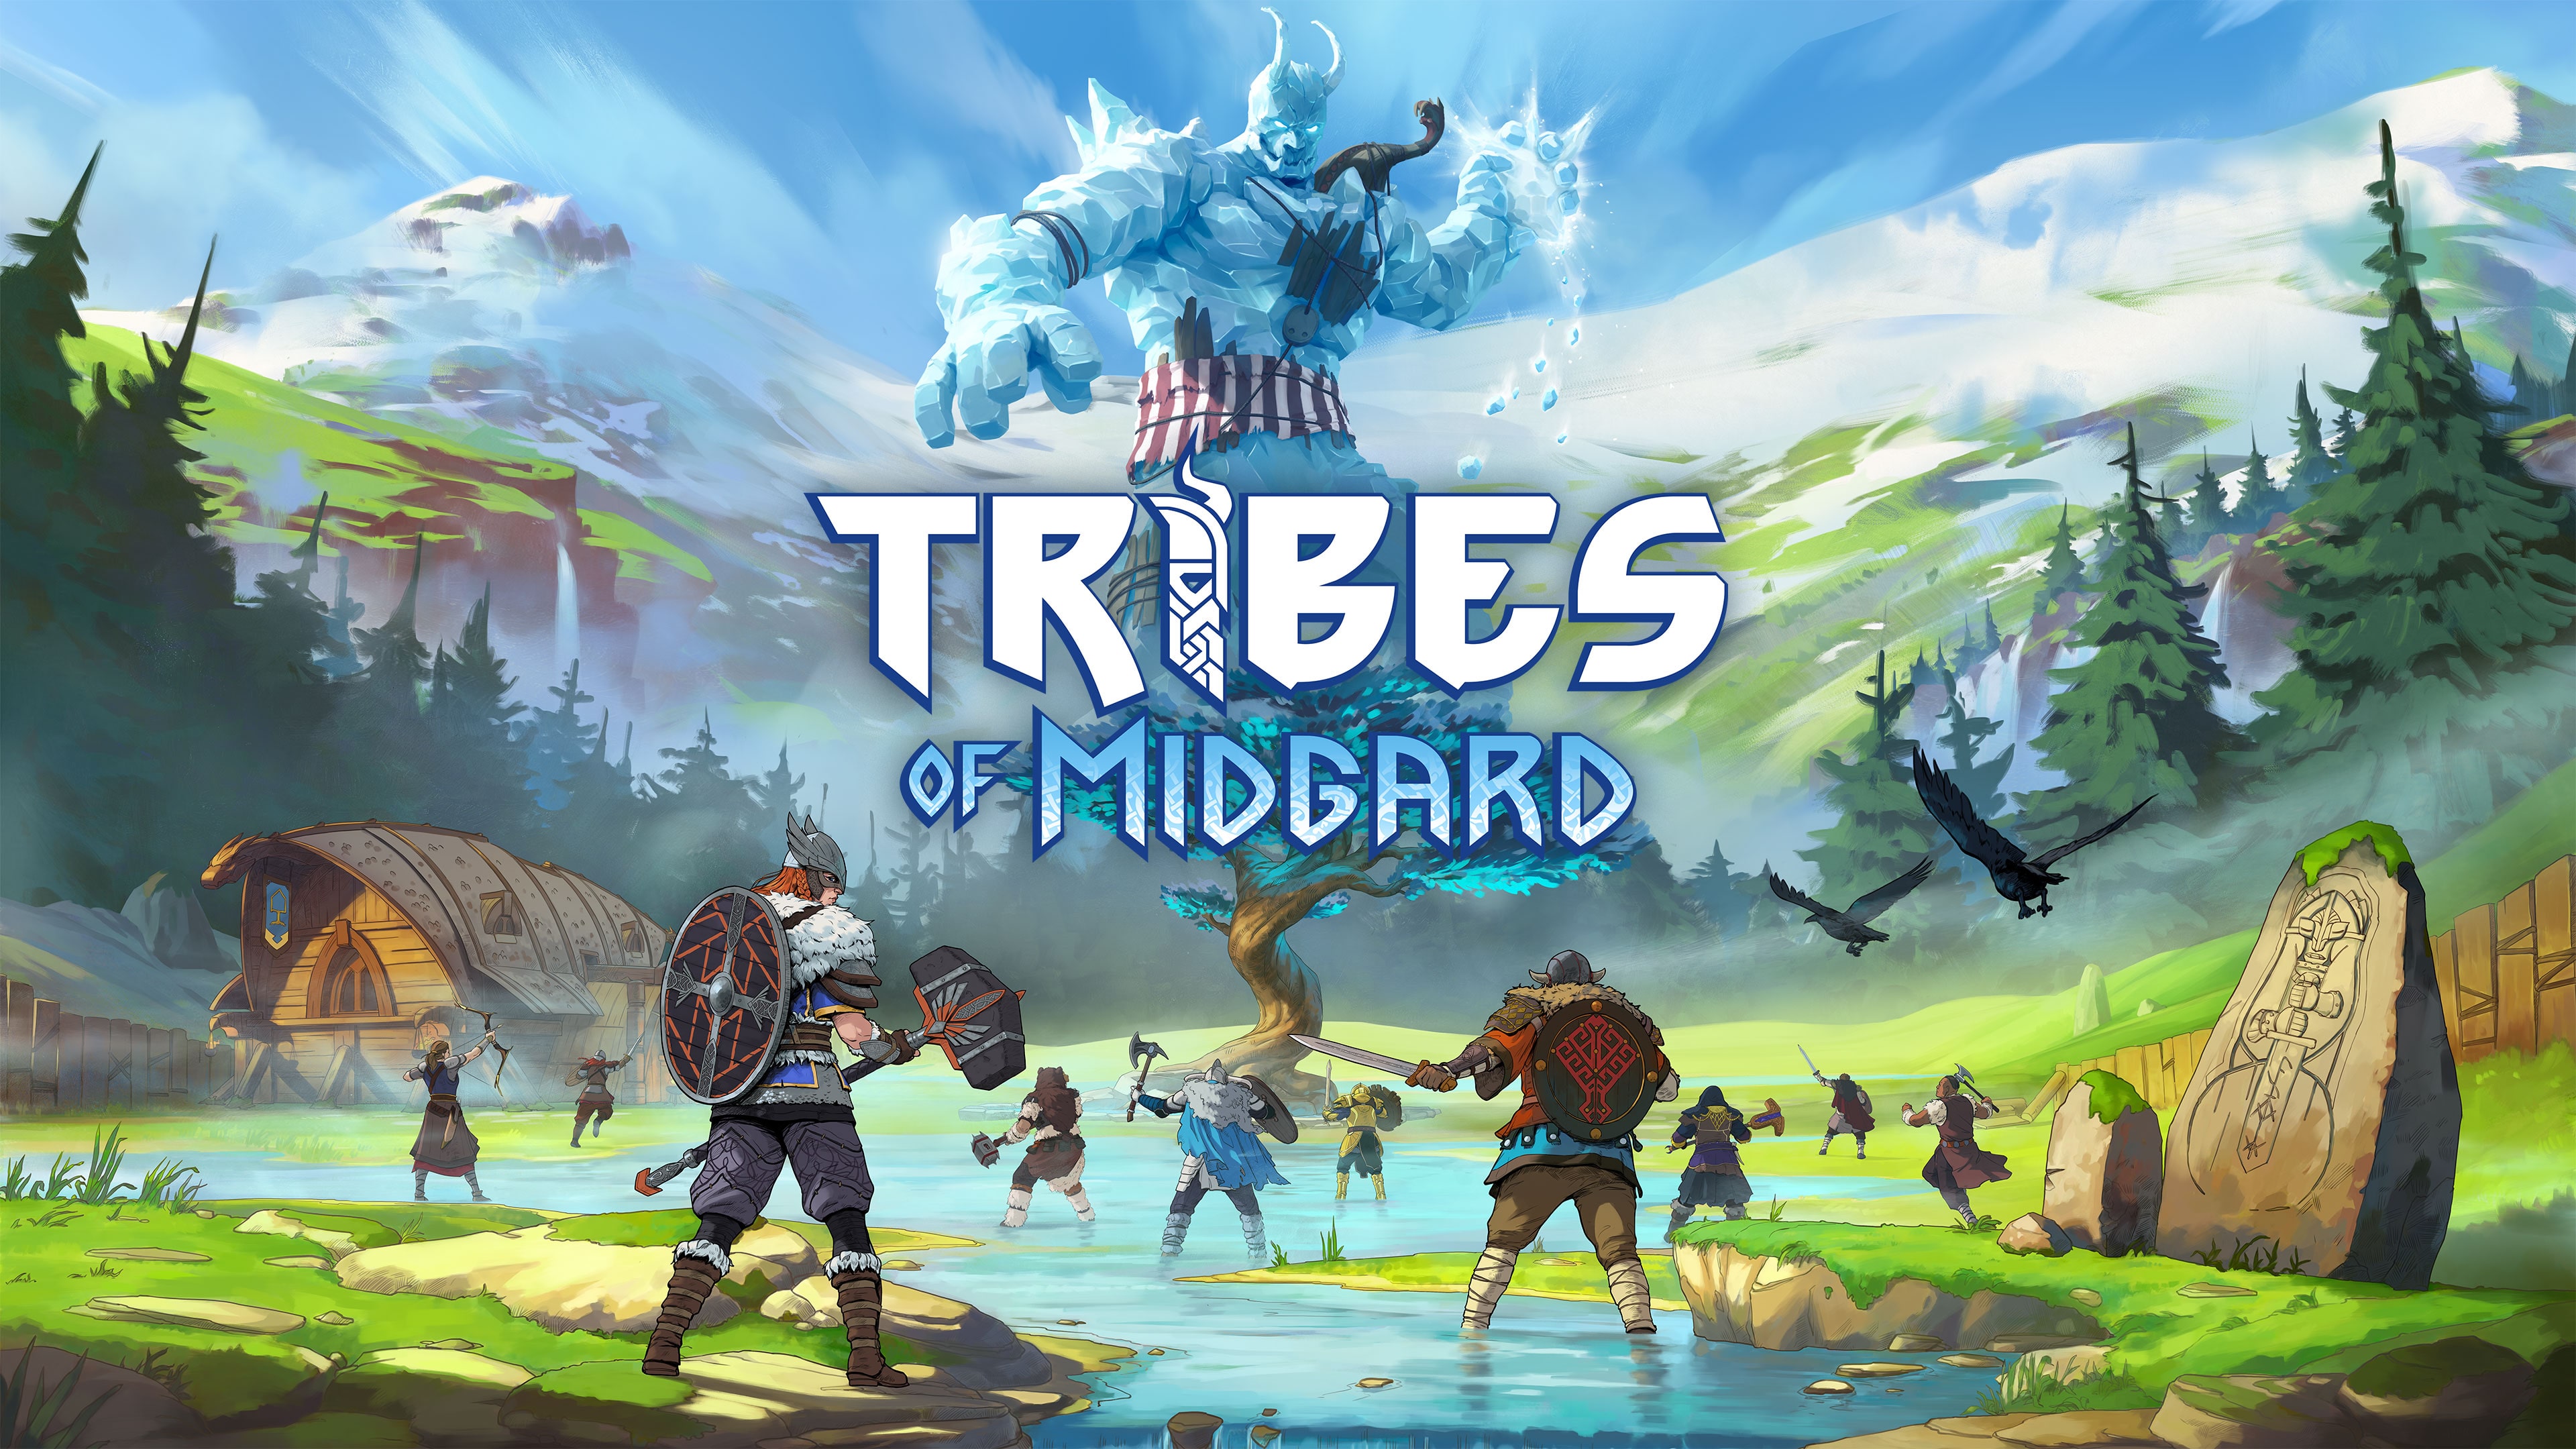 Tribes of Midgard PS4 & PS5 (Simplified Chinese, English, Korean, Thai, Japanese, Traditional Chinese)